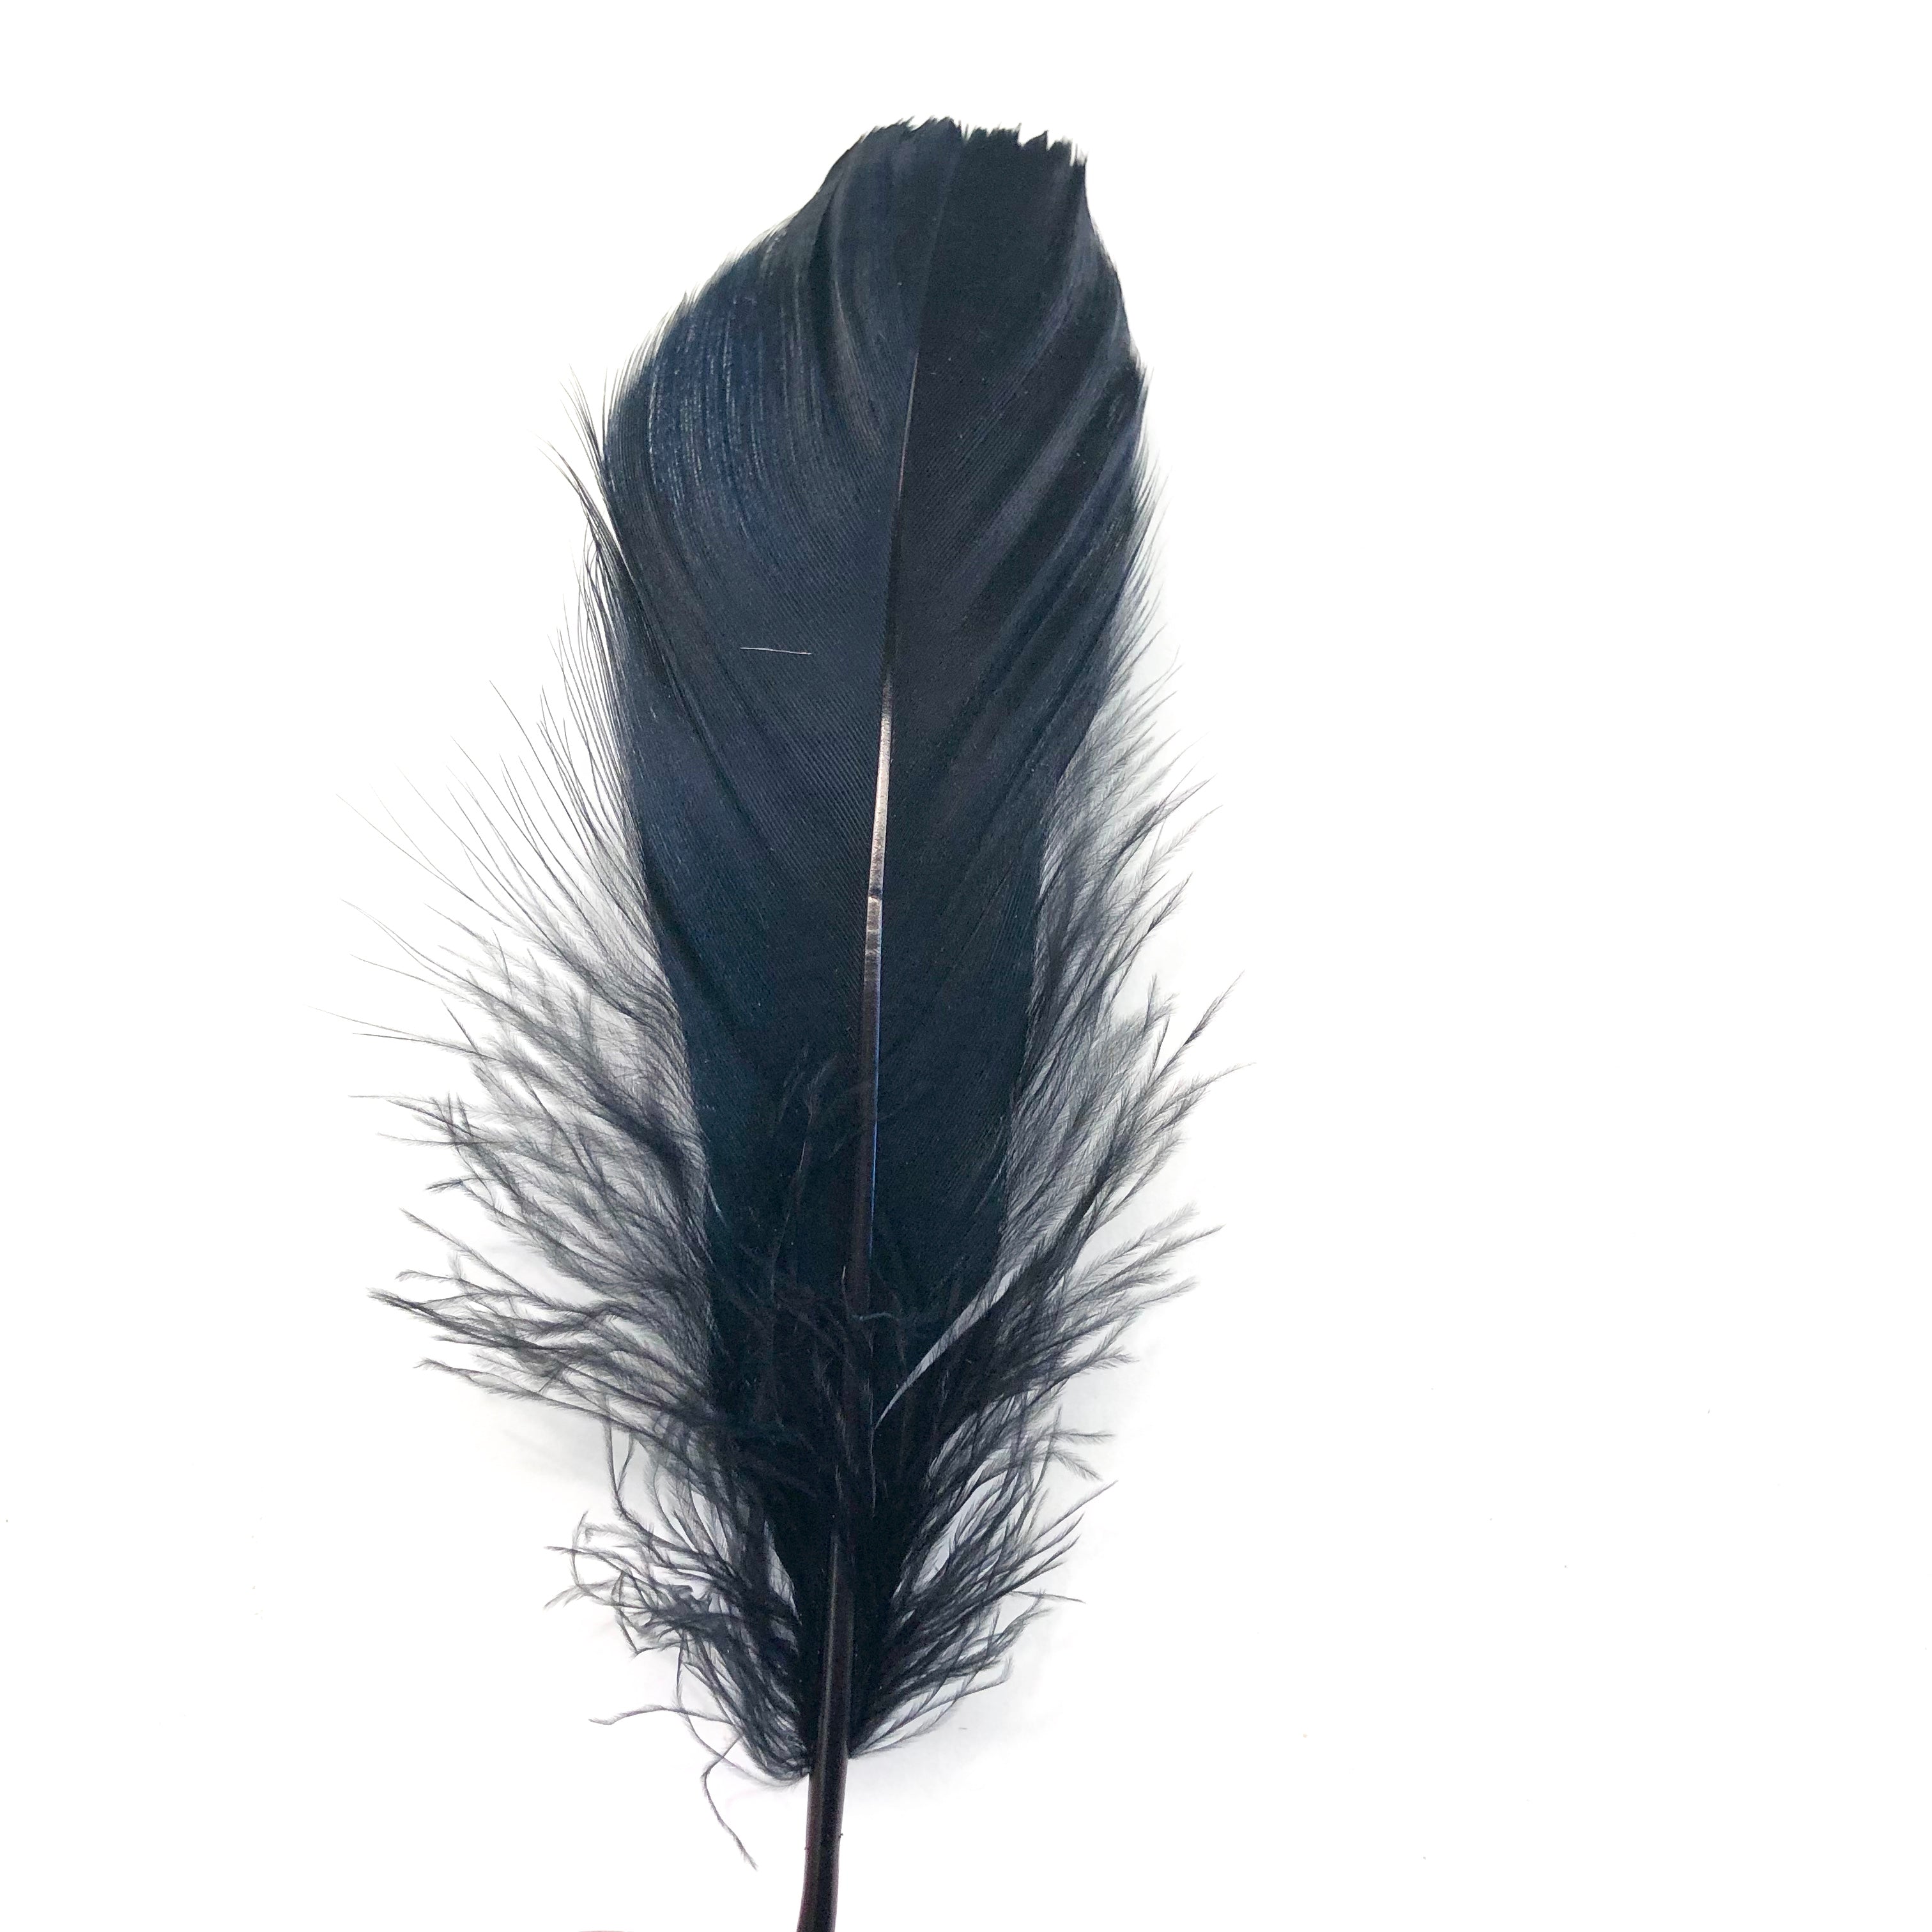 Goose Nagoire Feathers 10 grams - Black